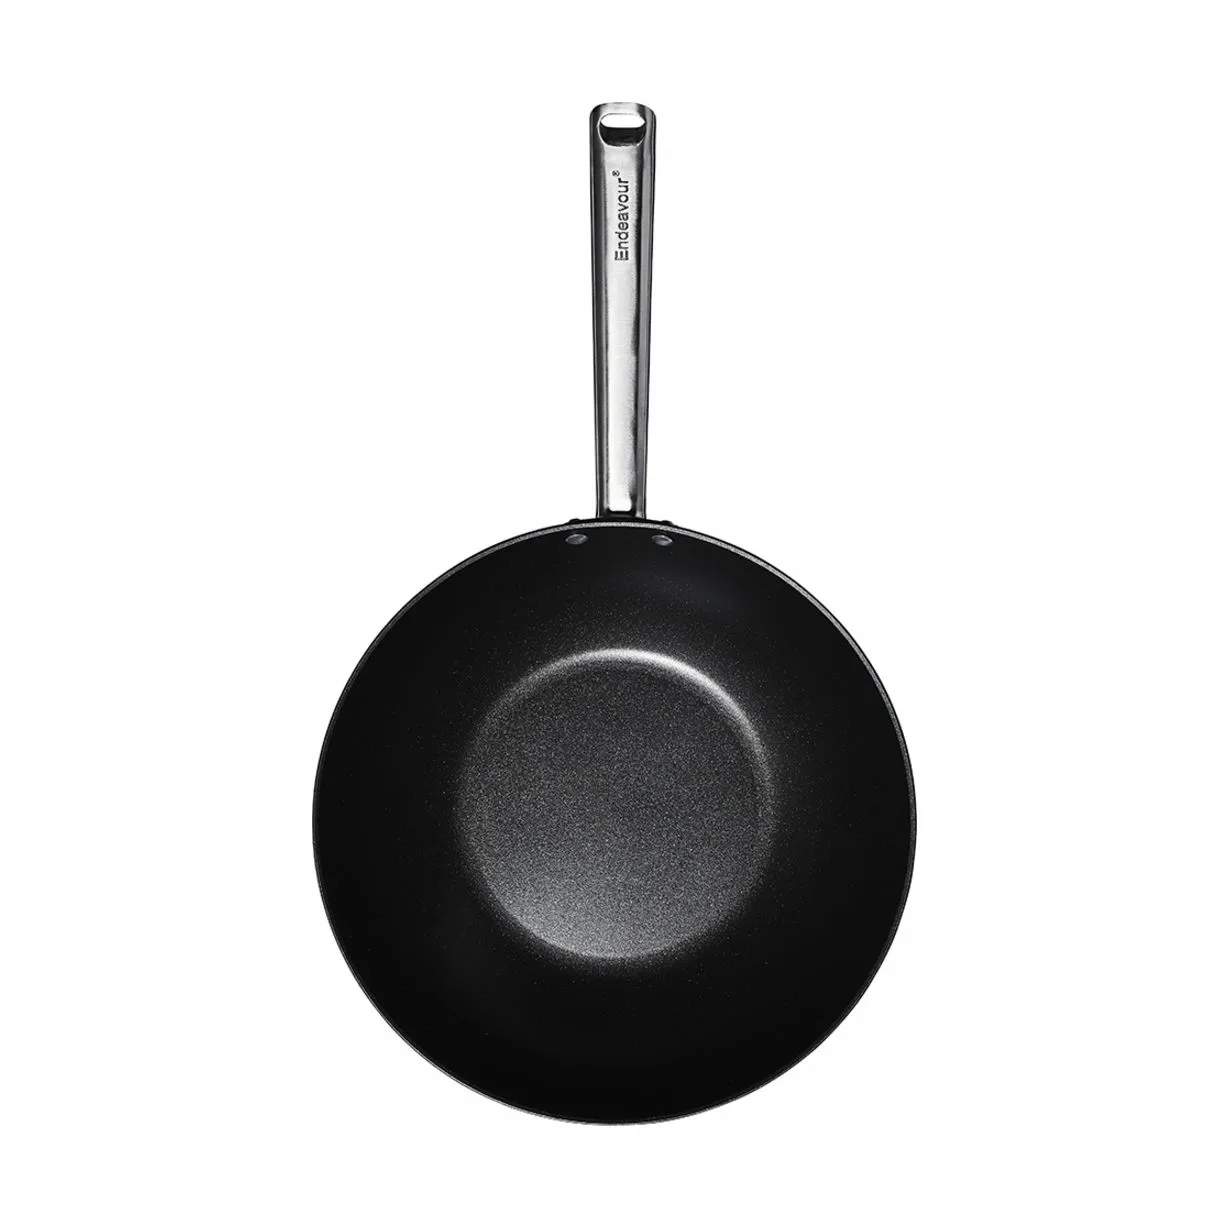 Small Skillet The Wok